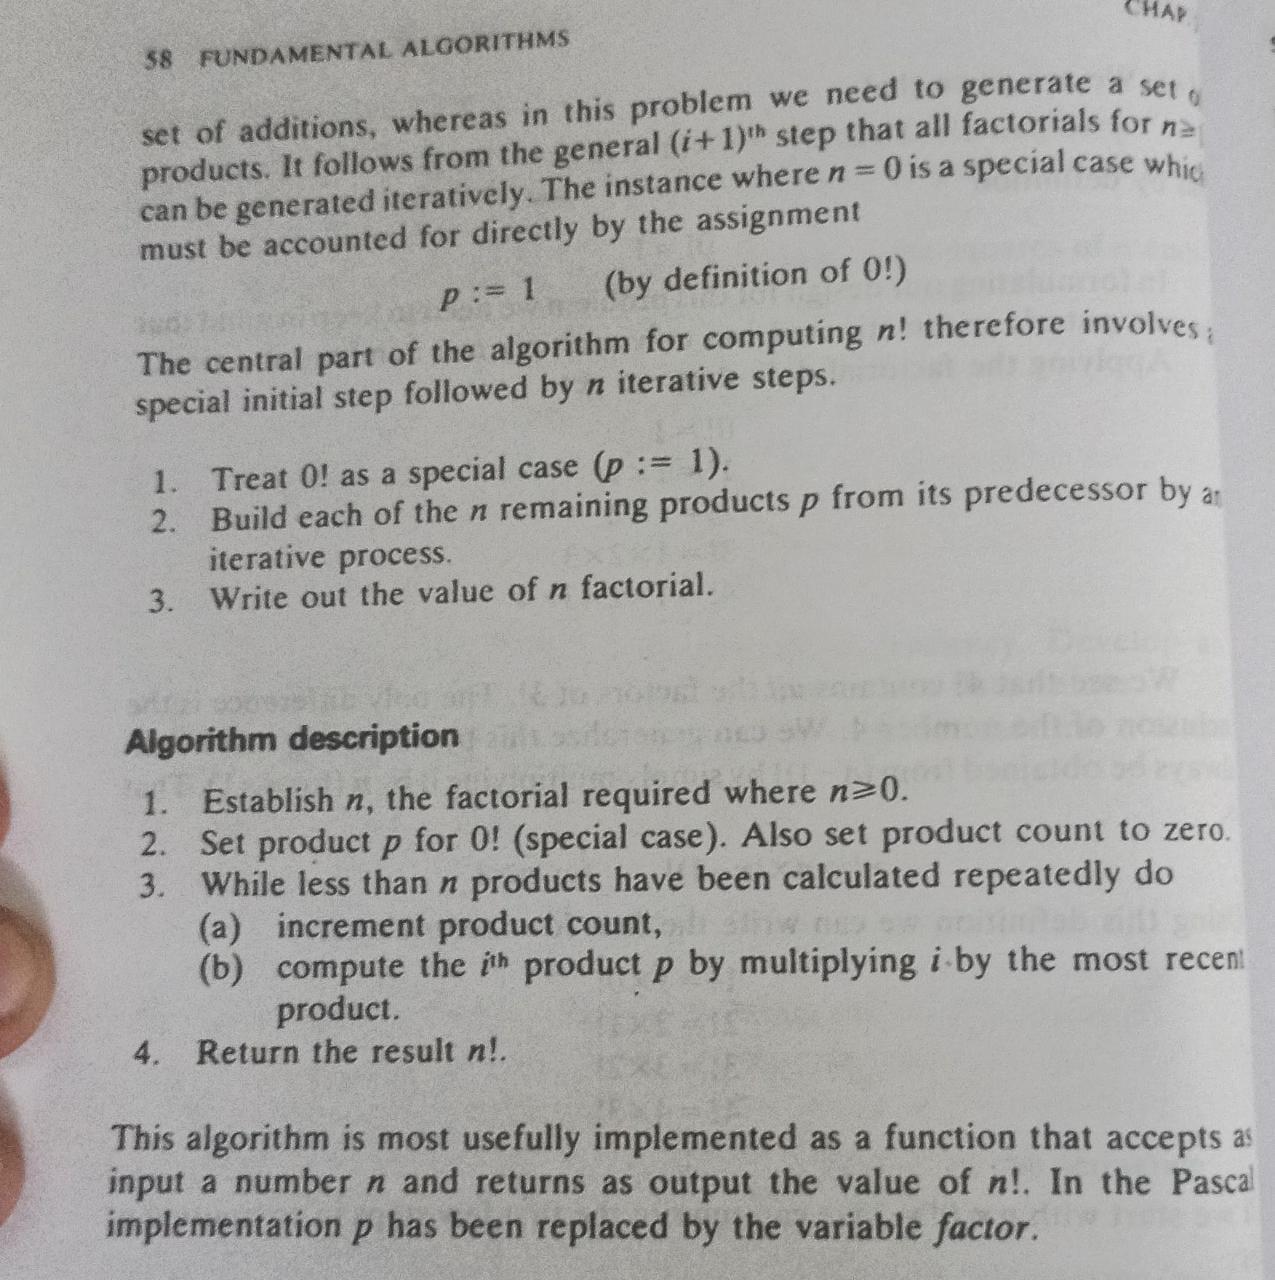 58 FUNDAMENTAL ALGORITHMS ne set of additions, whereas in this problem we need to generate a set o products.